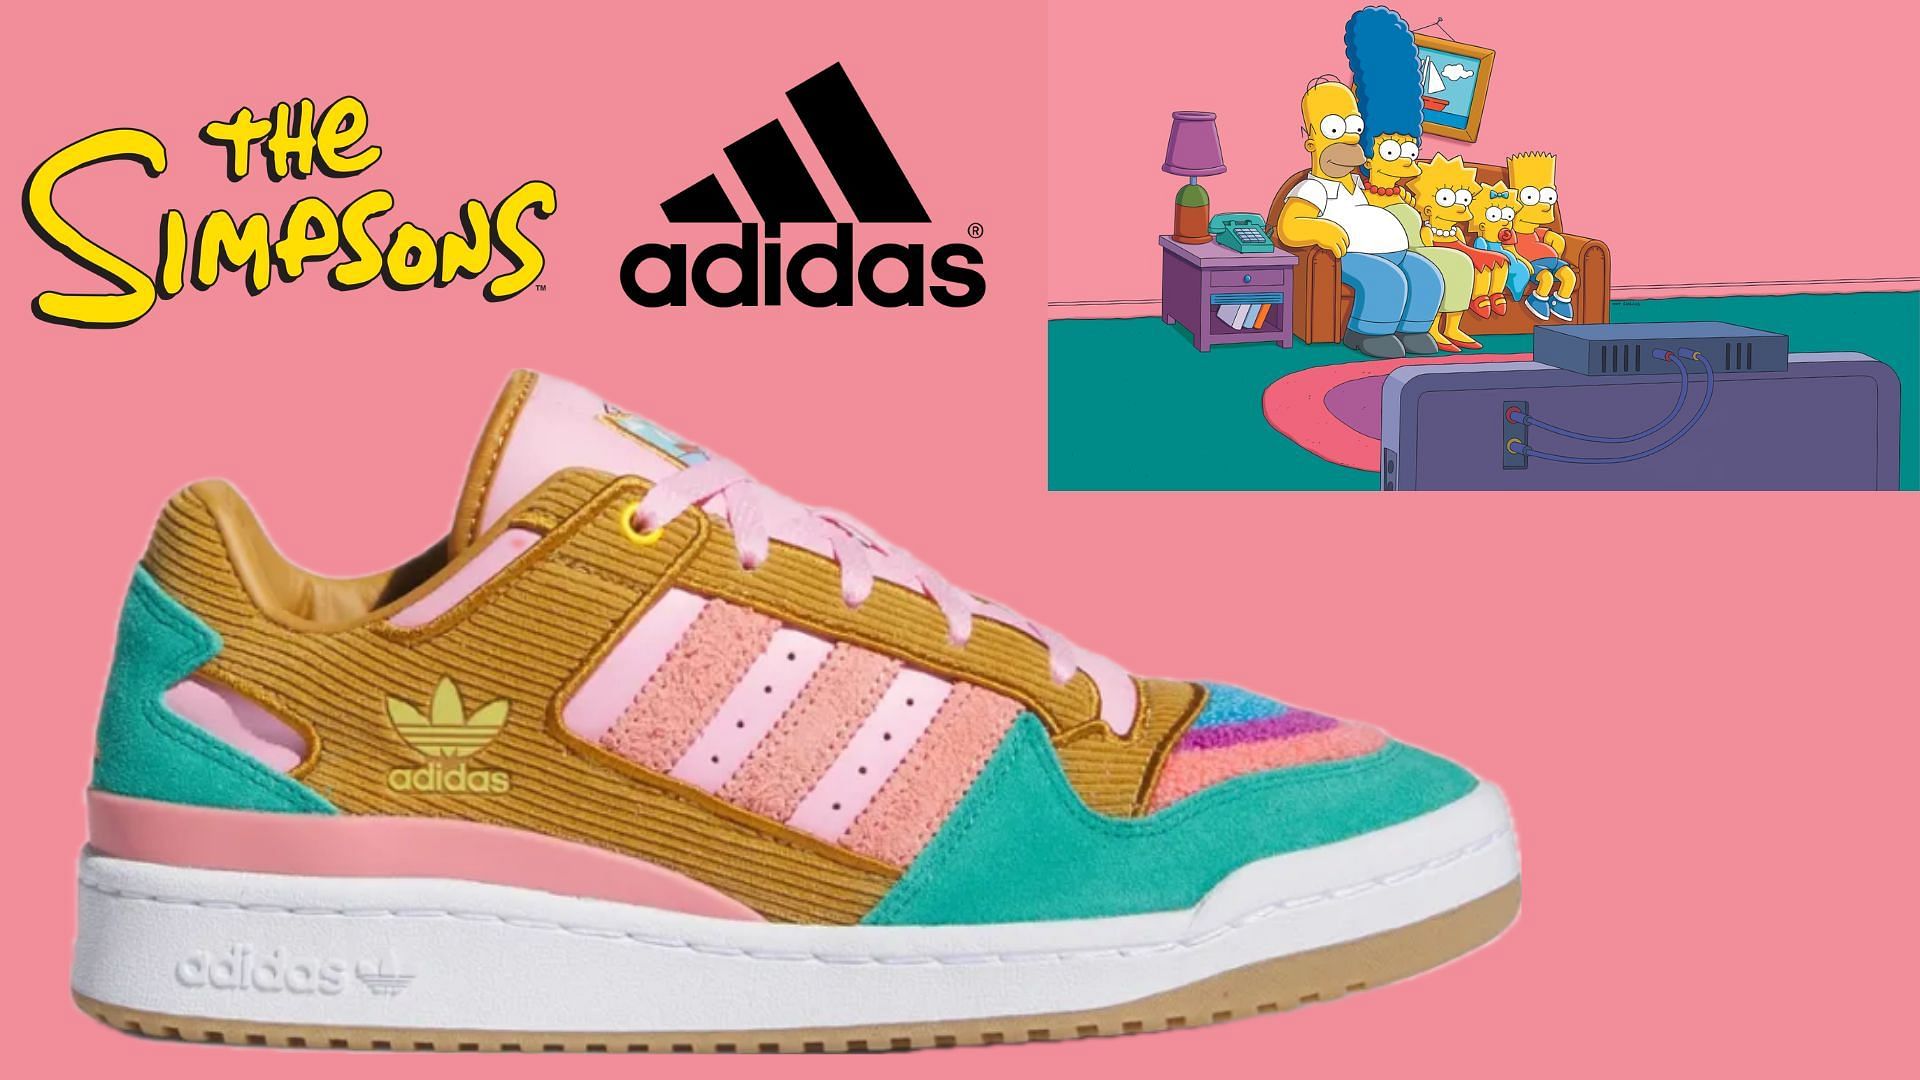 The Simpsons: The Simpsons x Adidas Forum Low “Living Room” shoes ...